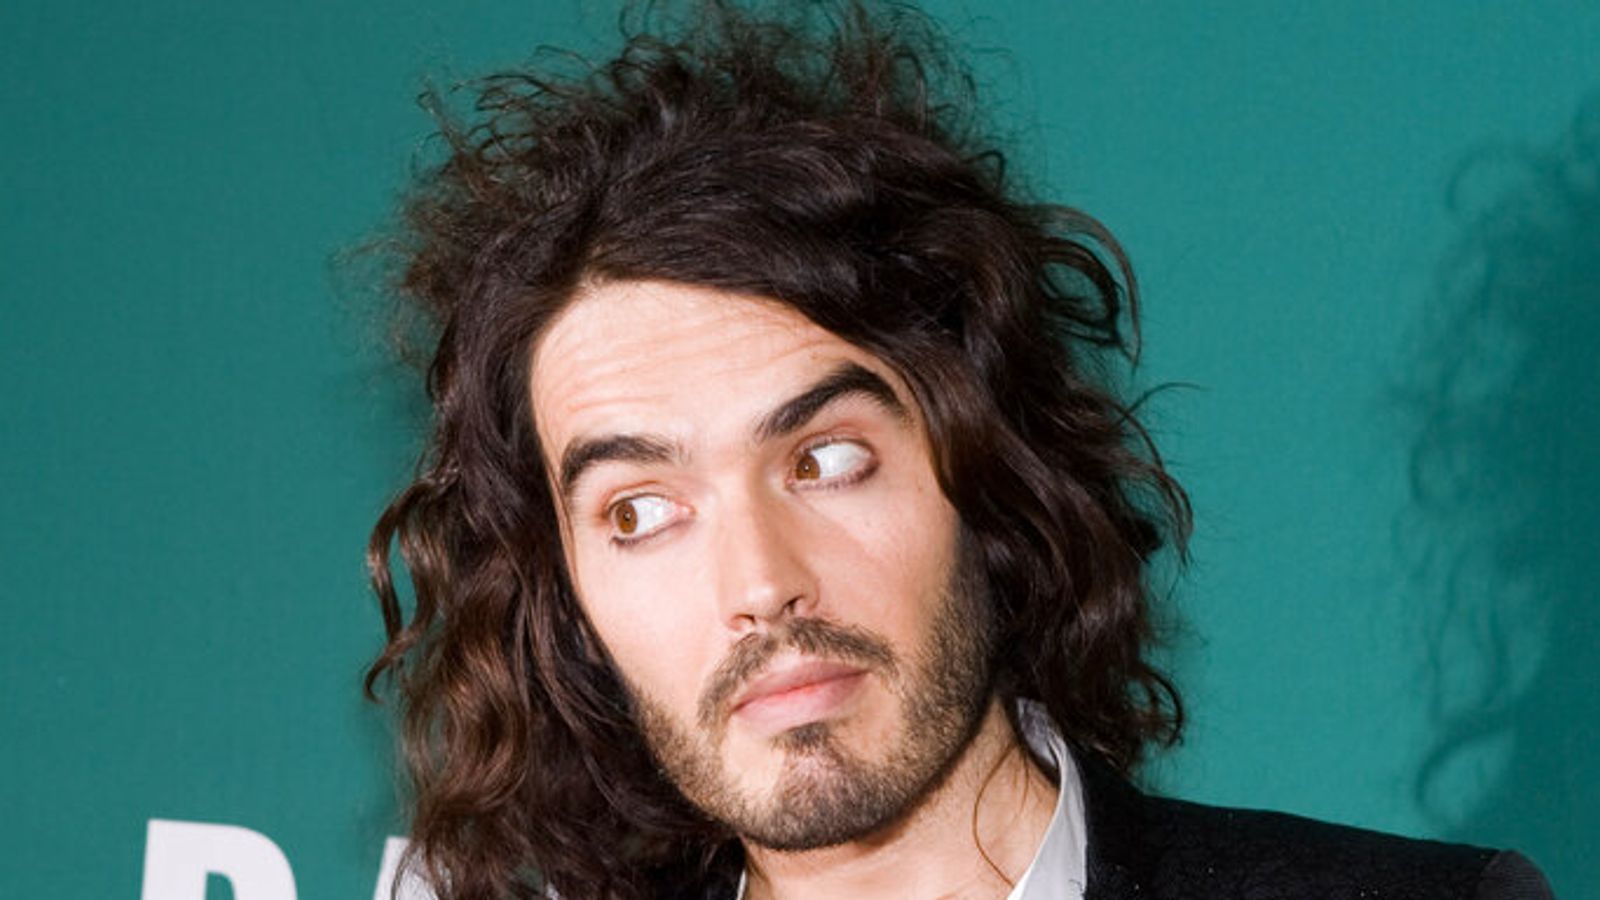 Russell Brand: From drug addict to comedy star often at the centre of controversy